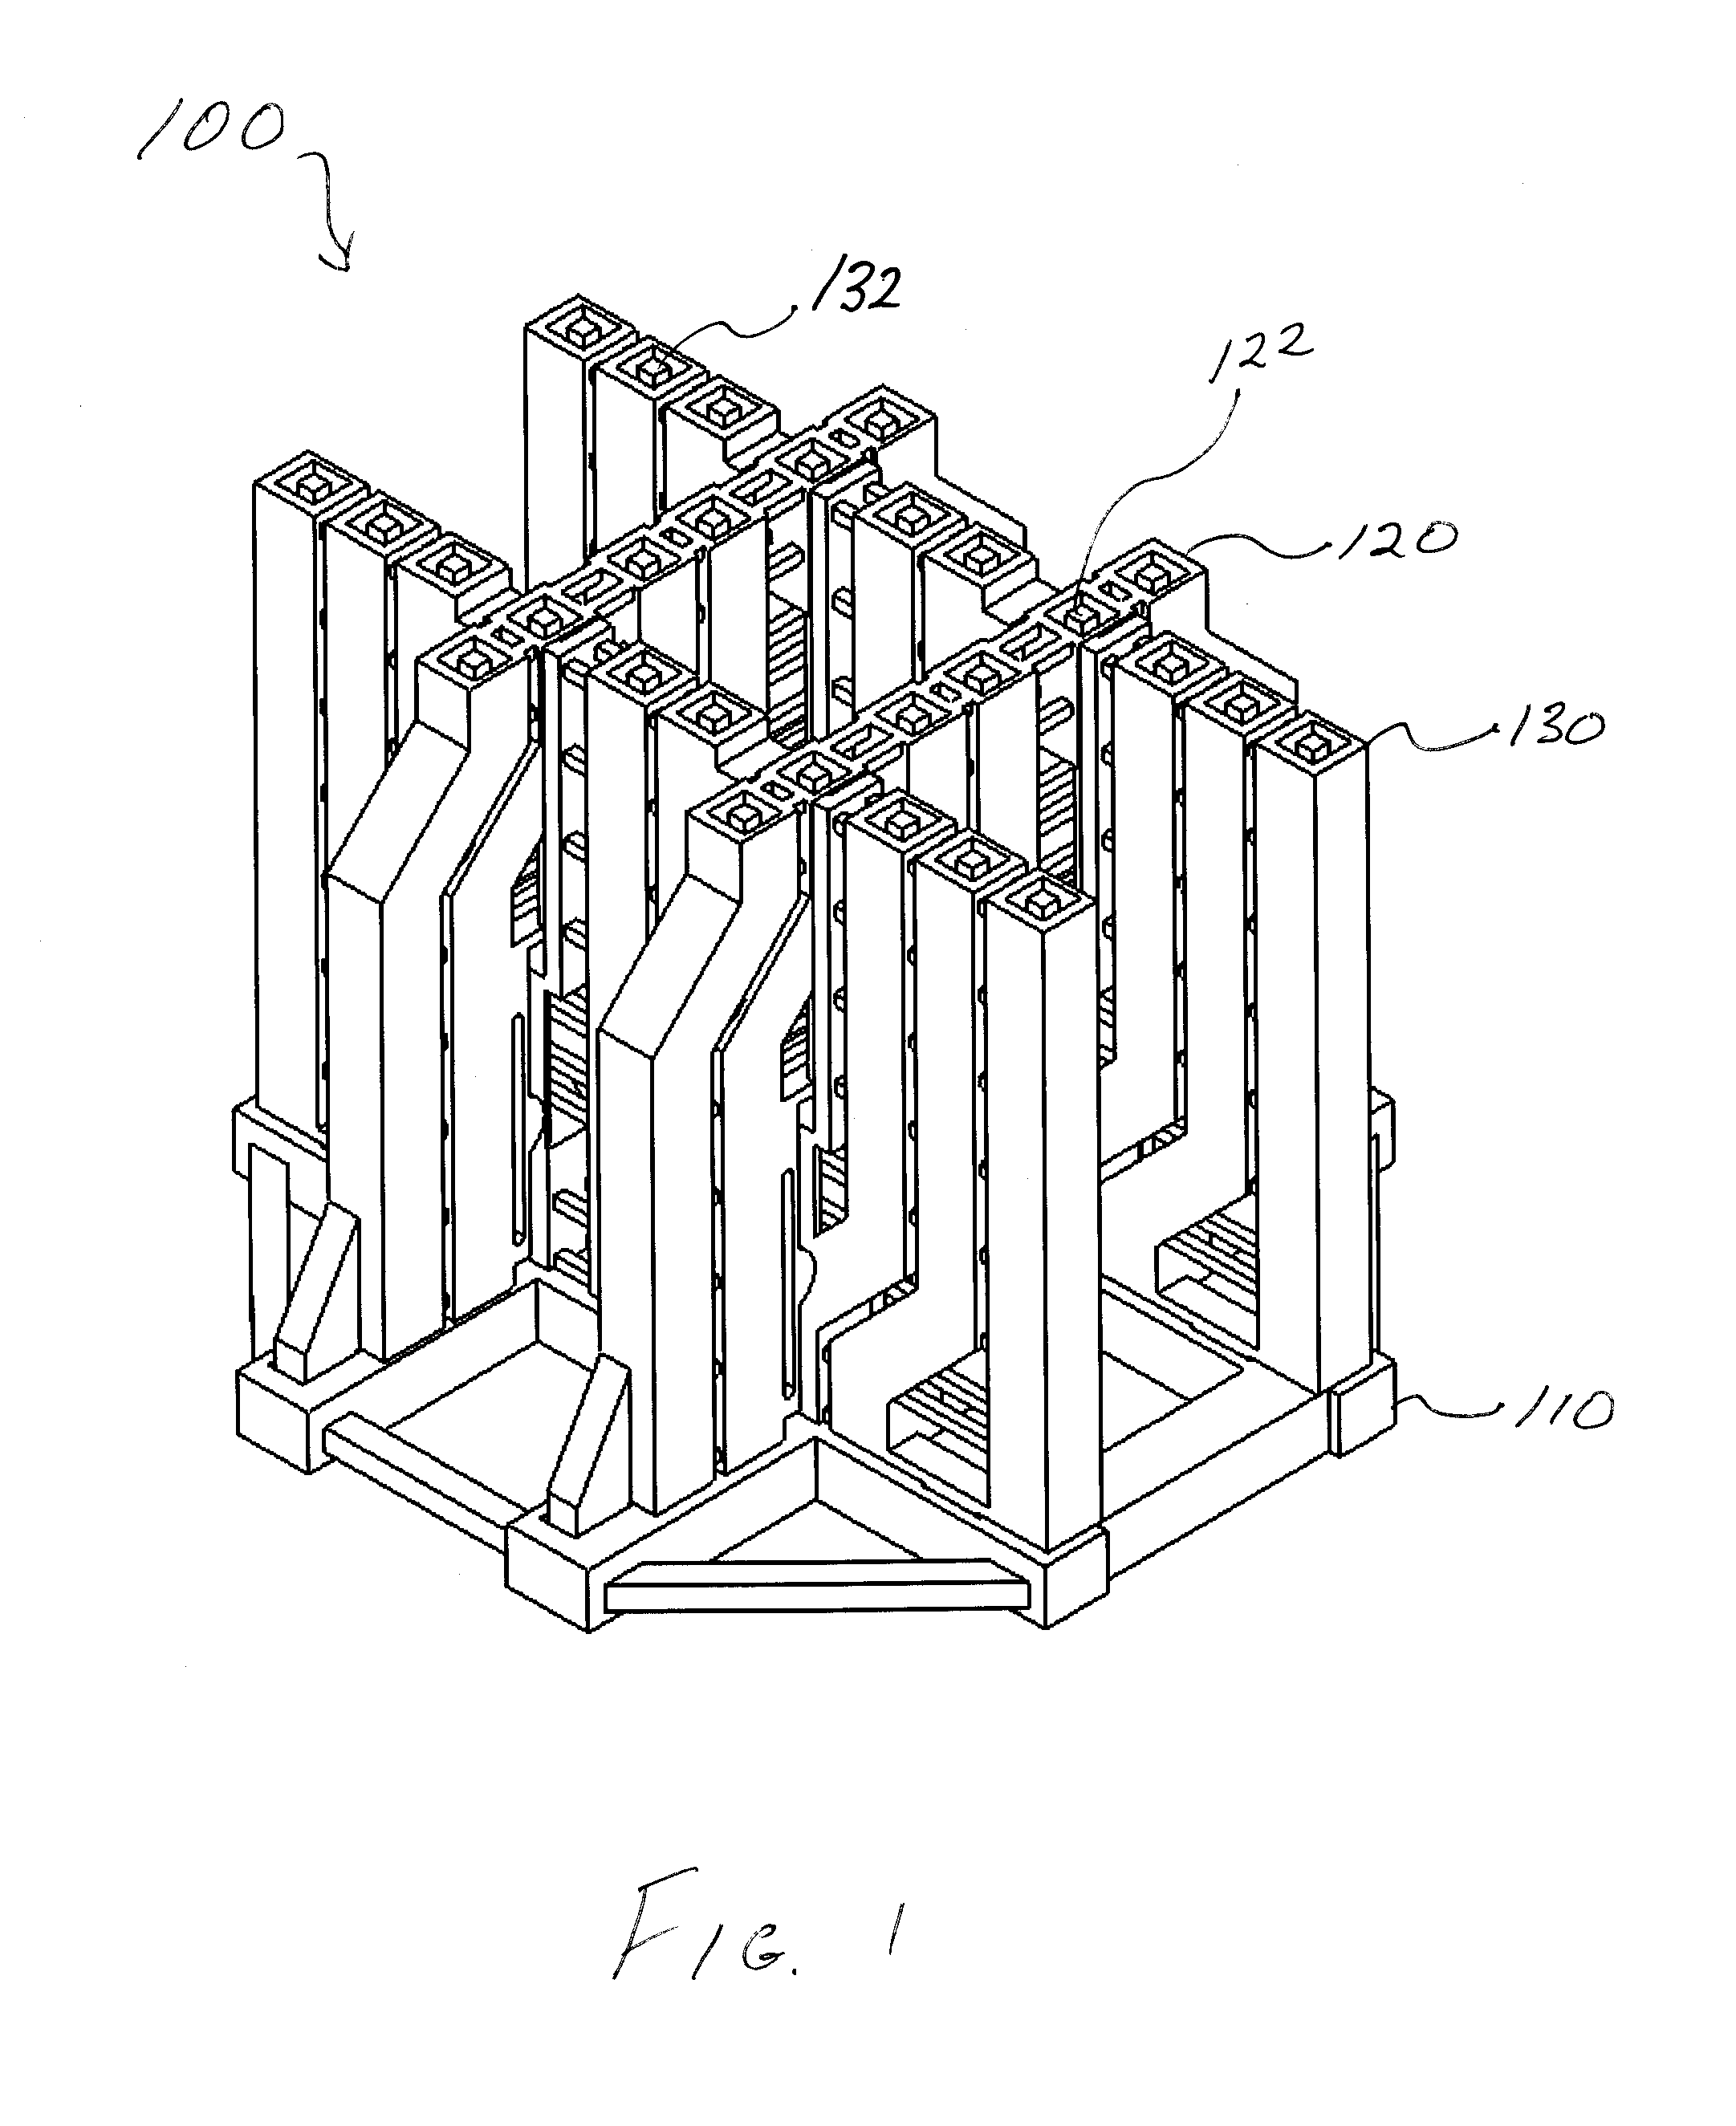 Substrate-free mechanical interconnection of electronic sub-systems using a spring configuration